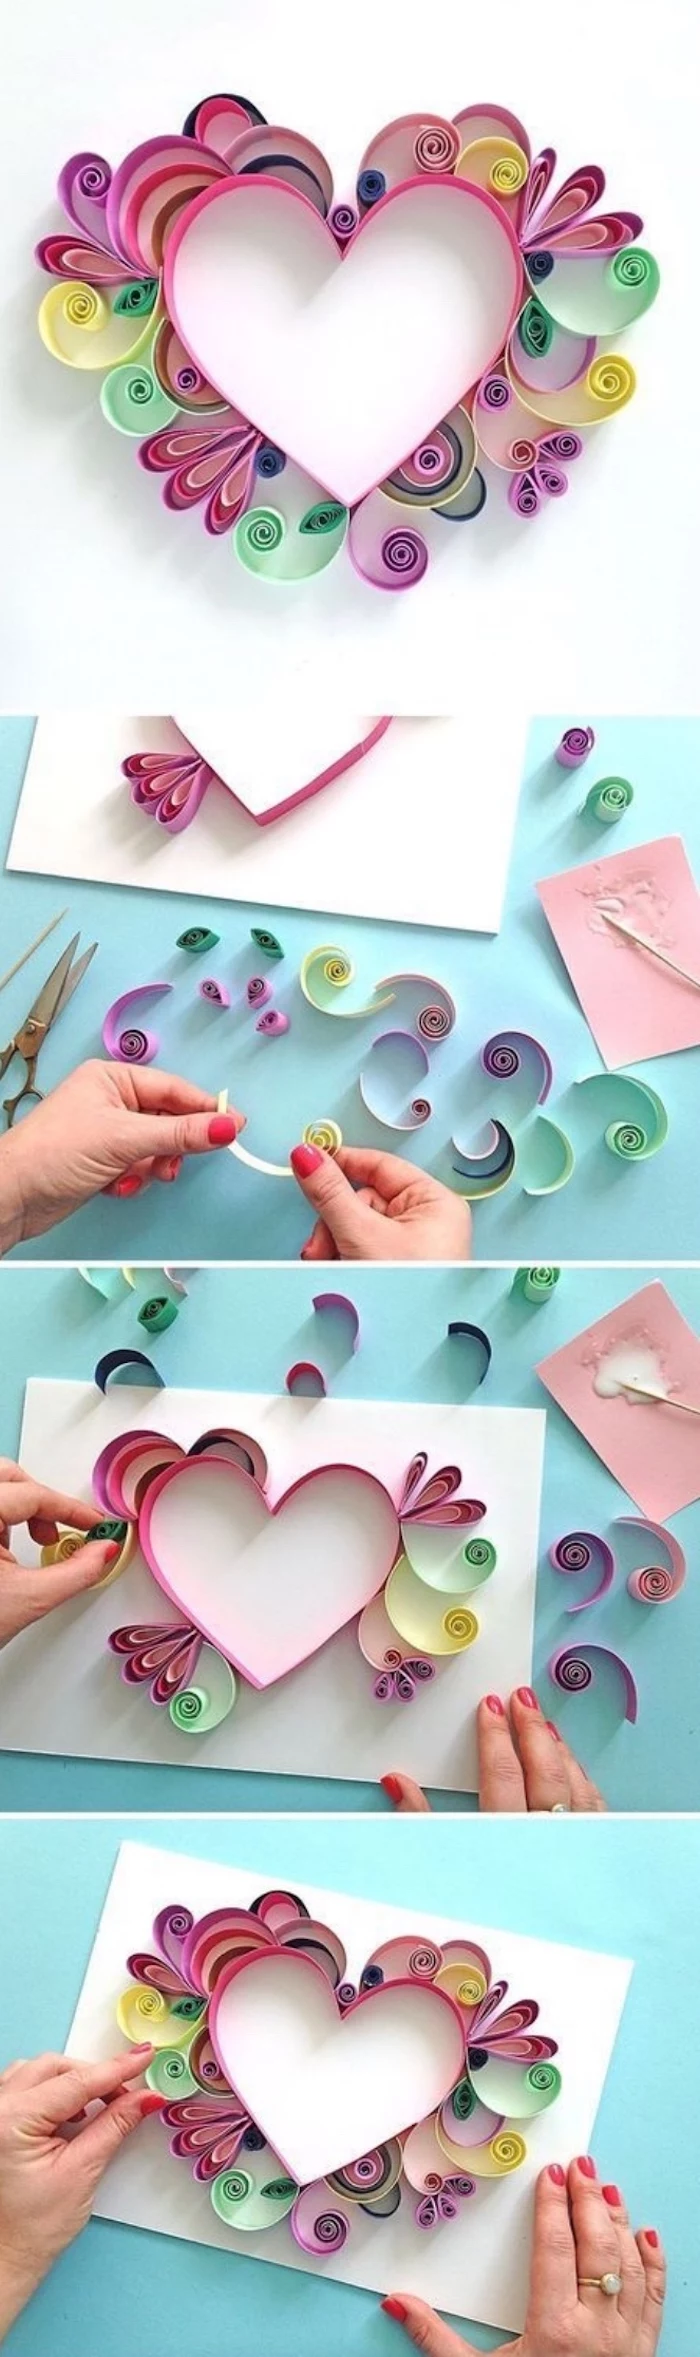 kindergarten classroom games, paper quilling, heart made of paper, on white paper, diy tutorial